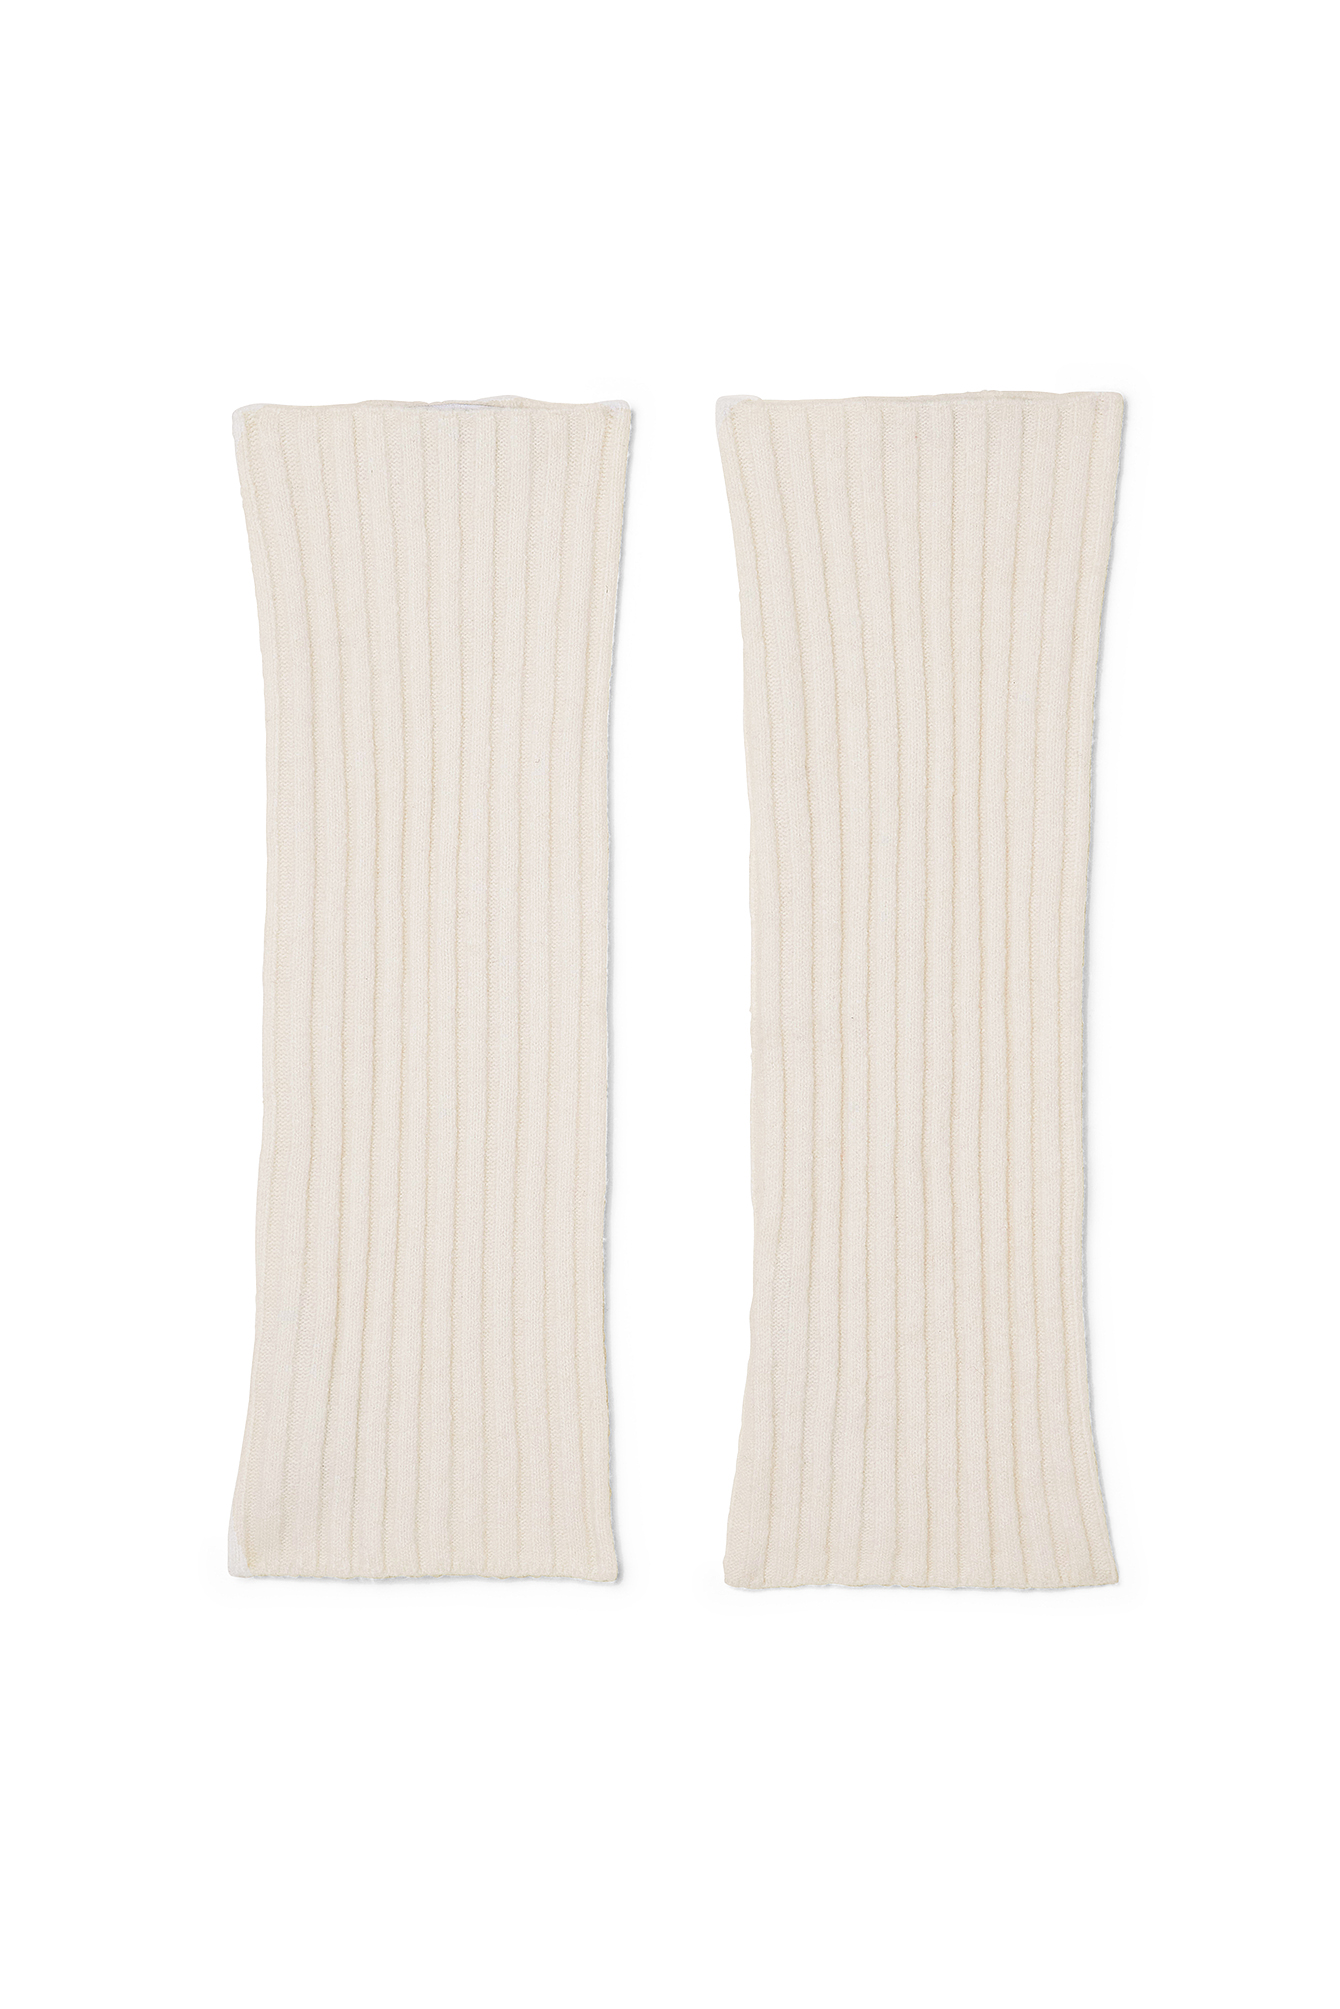 Knitted Leg Warmers White